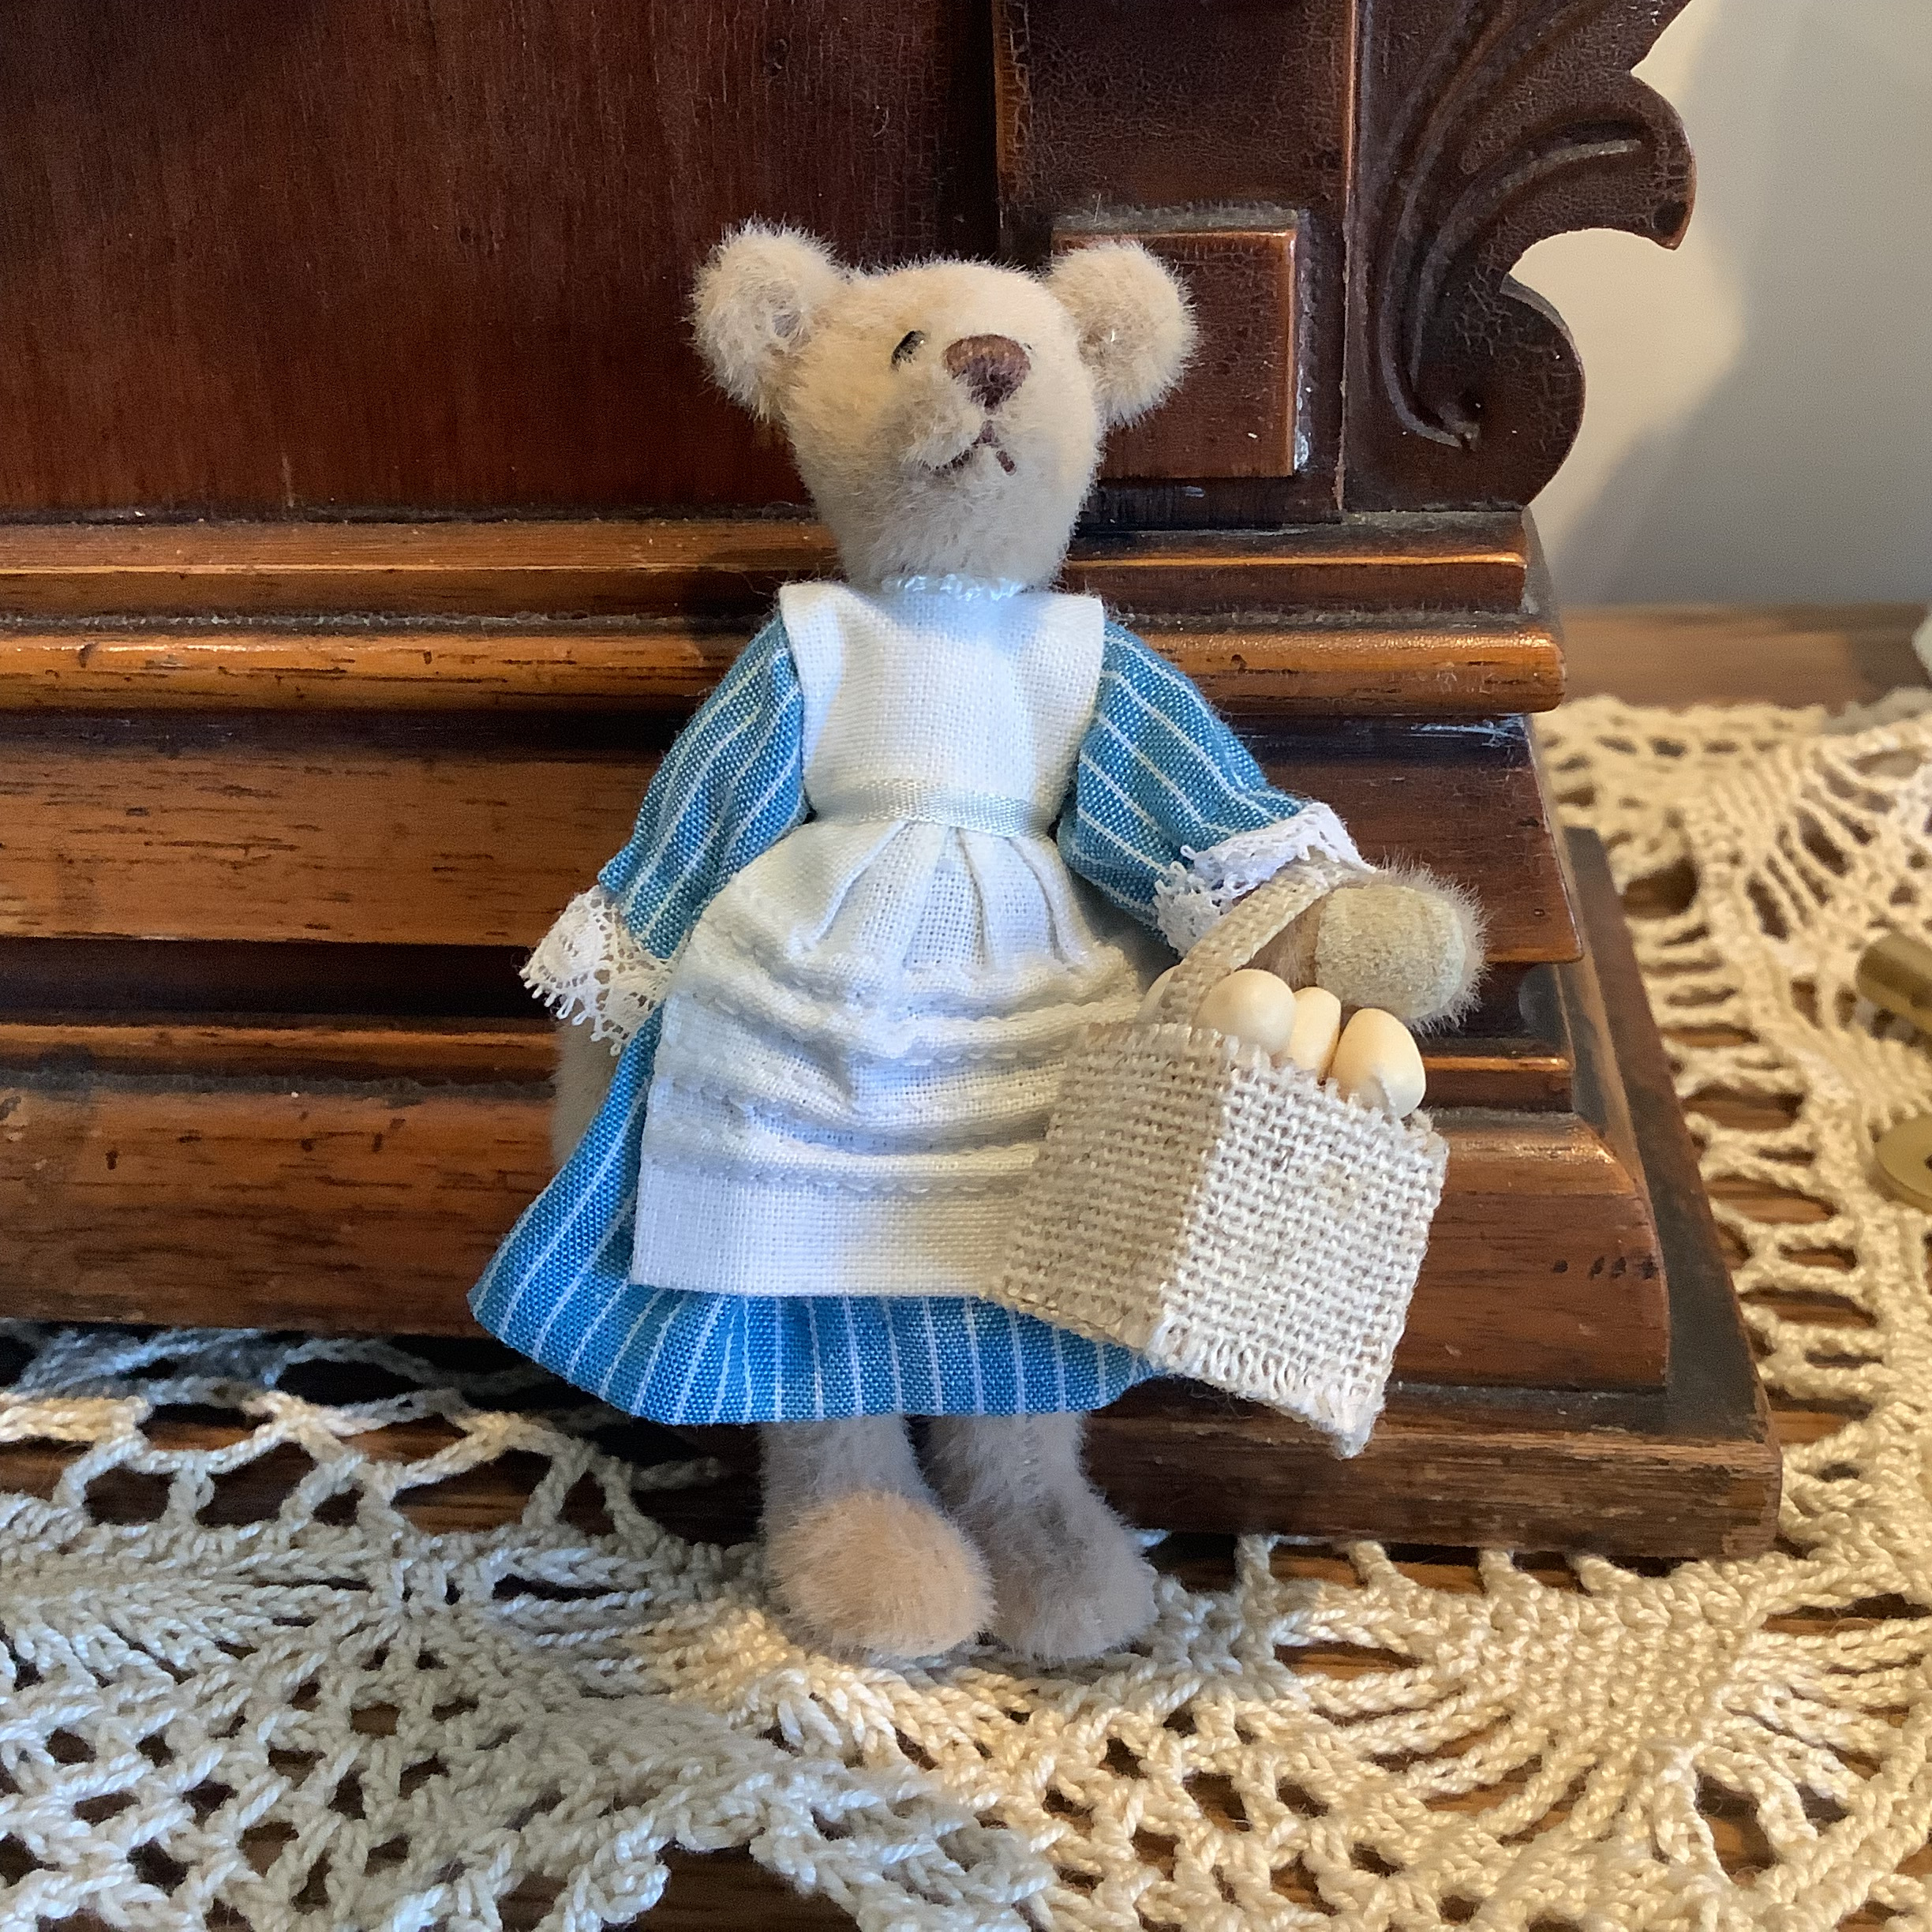 Small teddy bear doll in blue dress carrying a basket of eggs